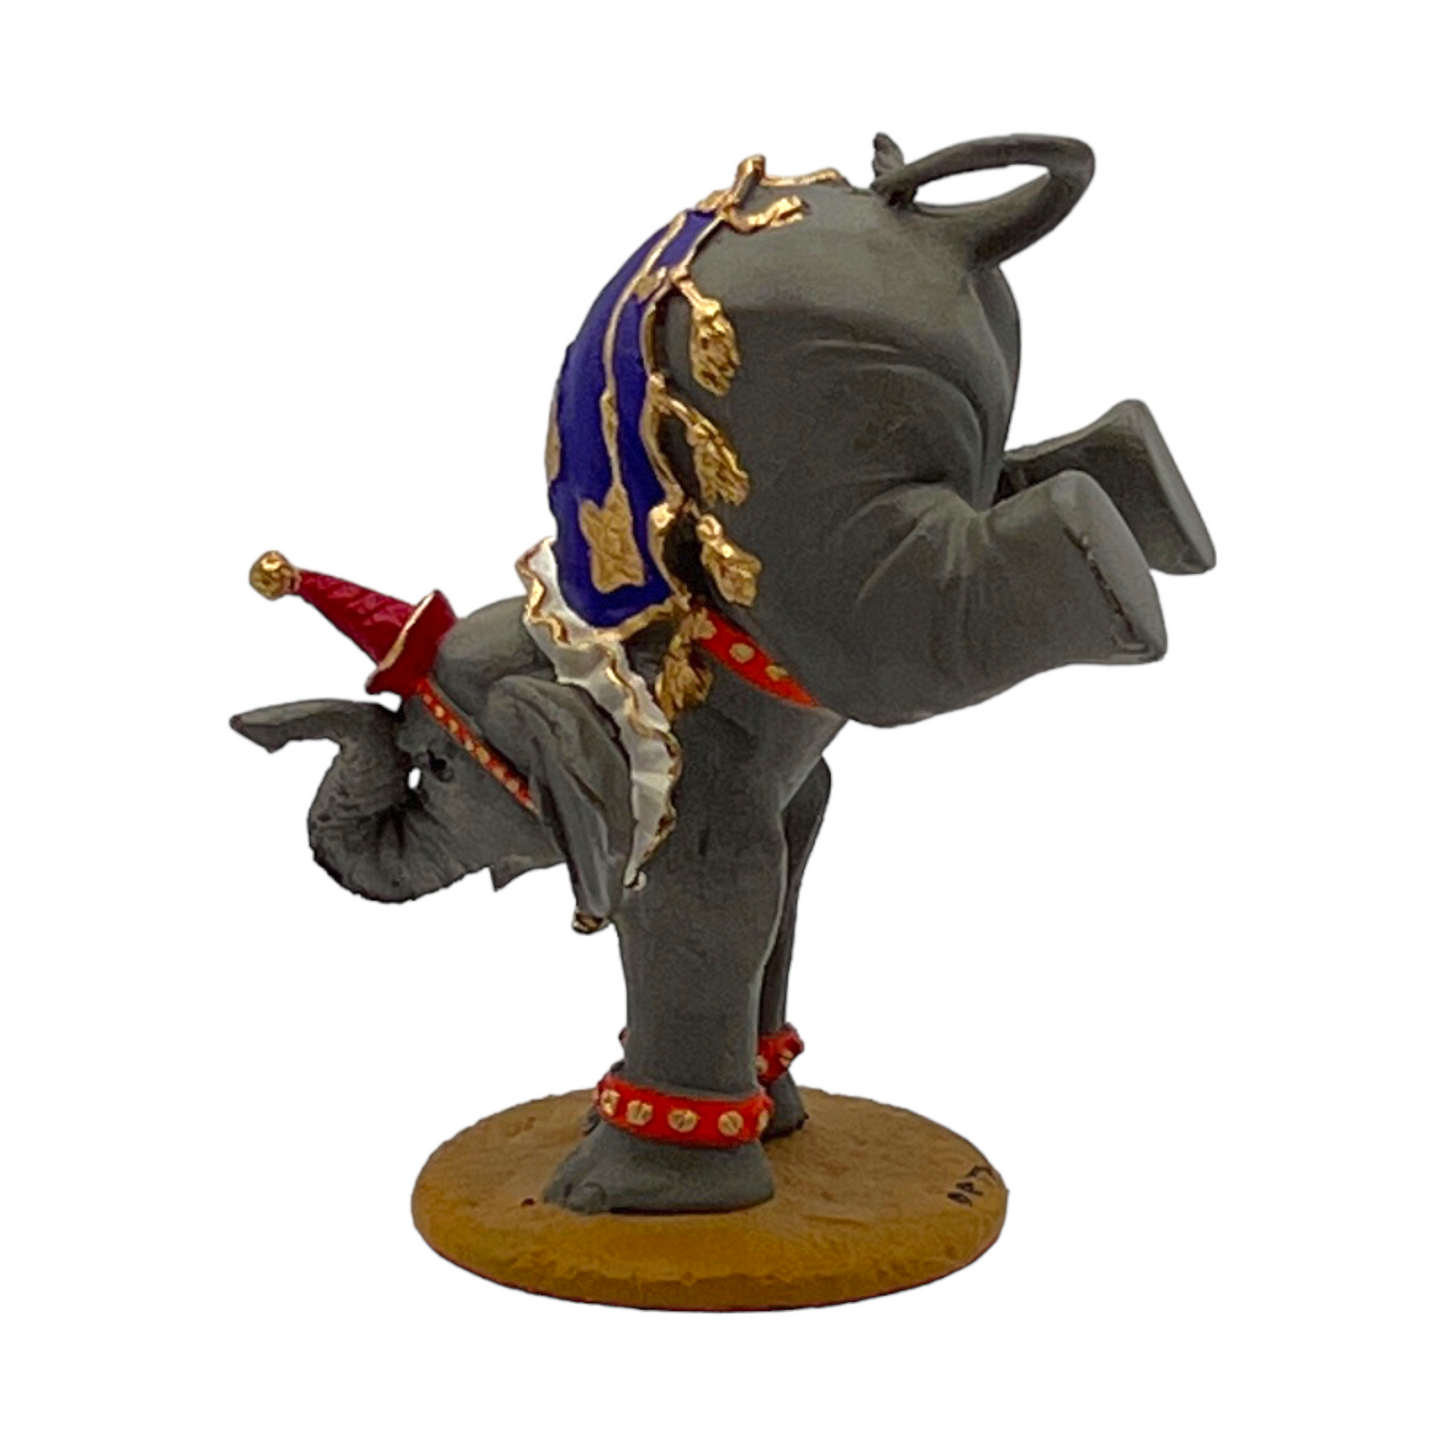 Ringling Brothers – Baby Elephant Figurine – 0077 Of 9500 – 3"